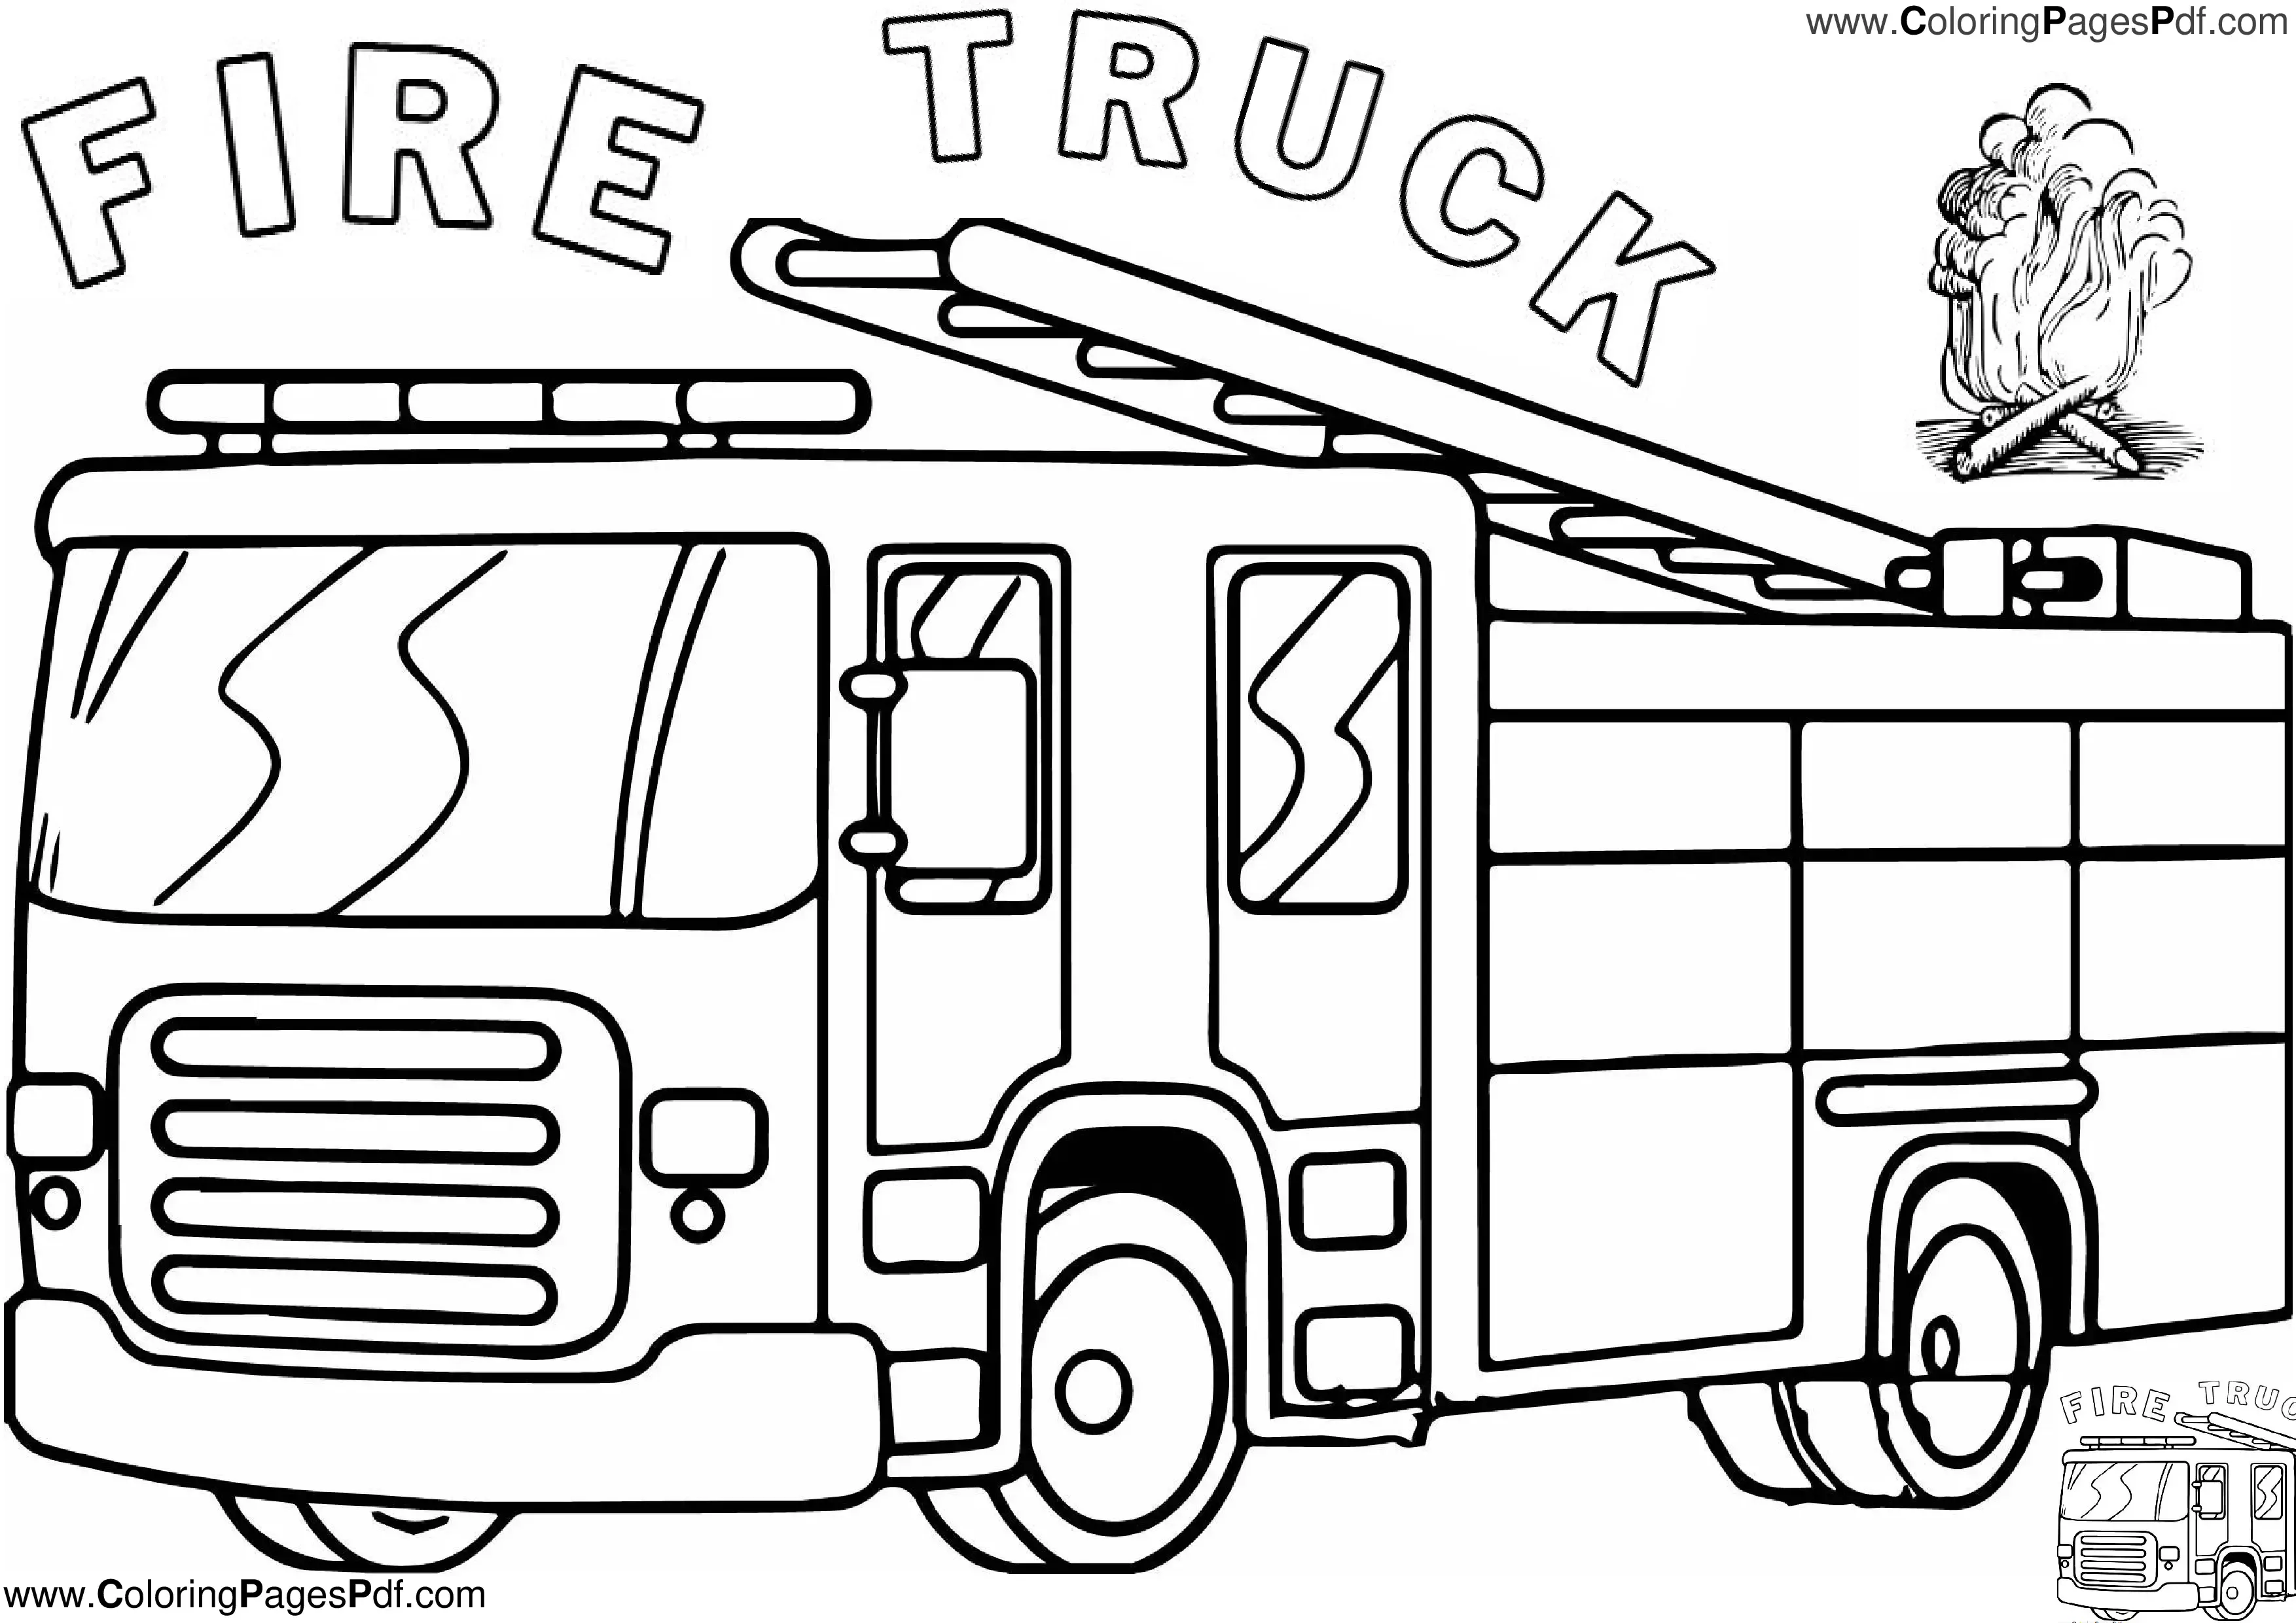 Fire truck coloring page easy